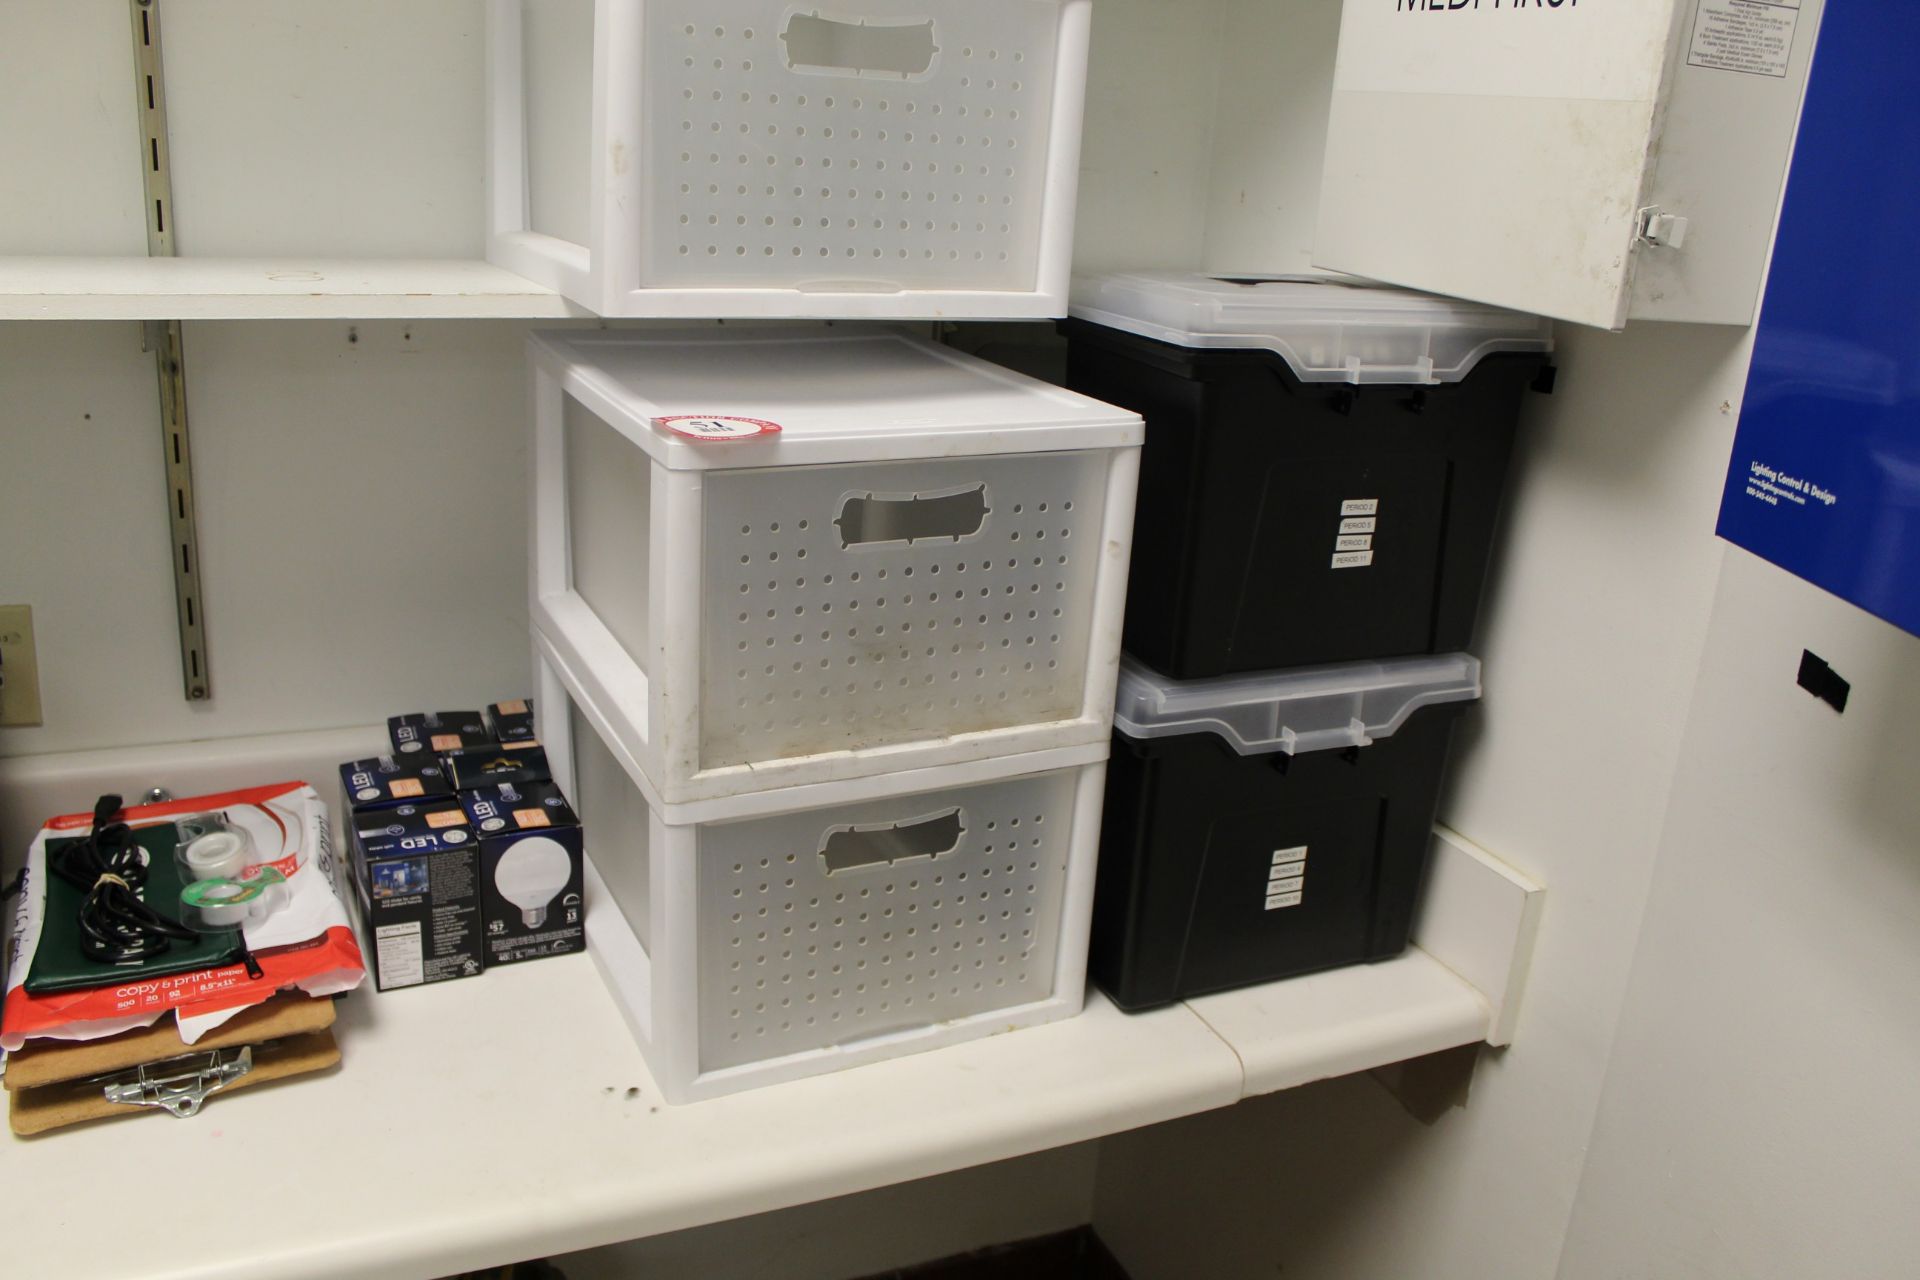 Remaining Contents of Office: File Boxes, Office Chair, Tools & Supplies, Light Bulbs, Etc